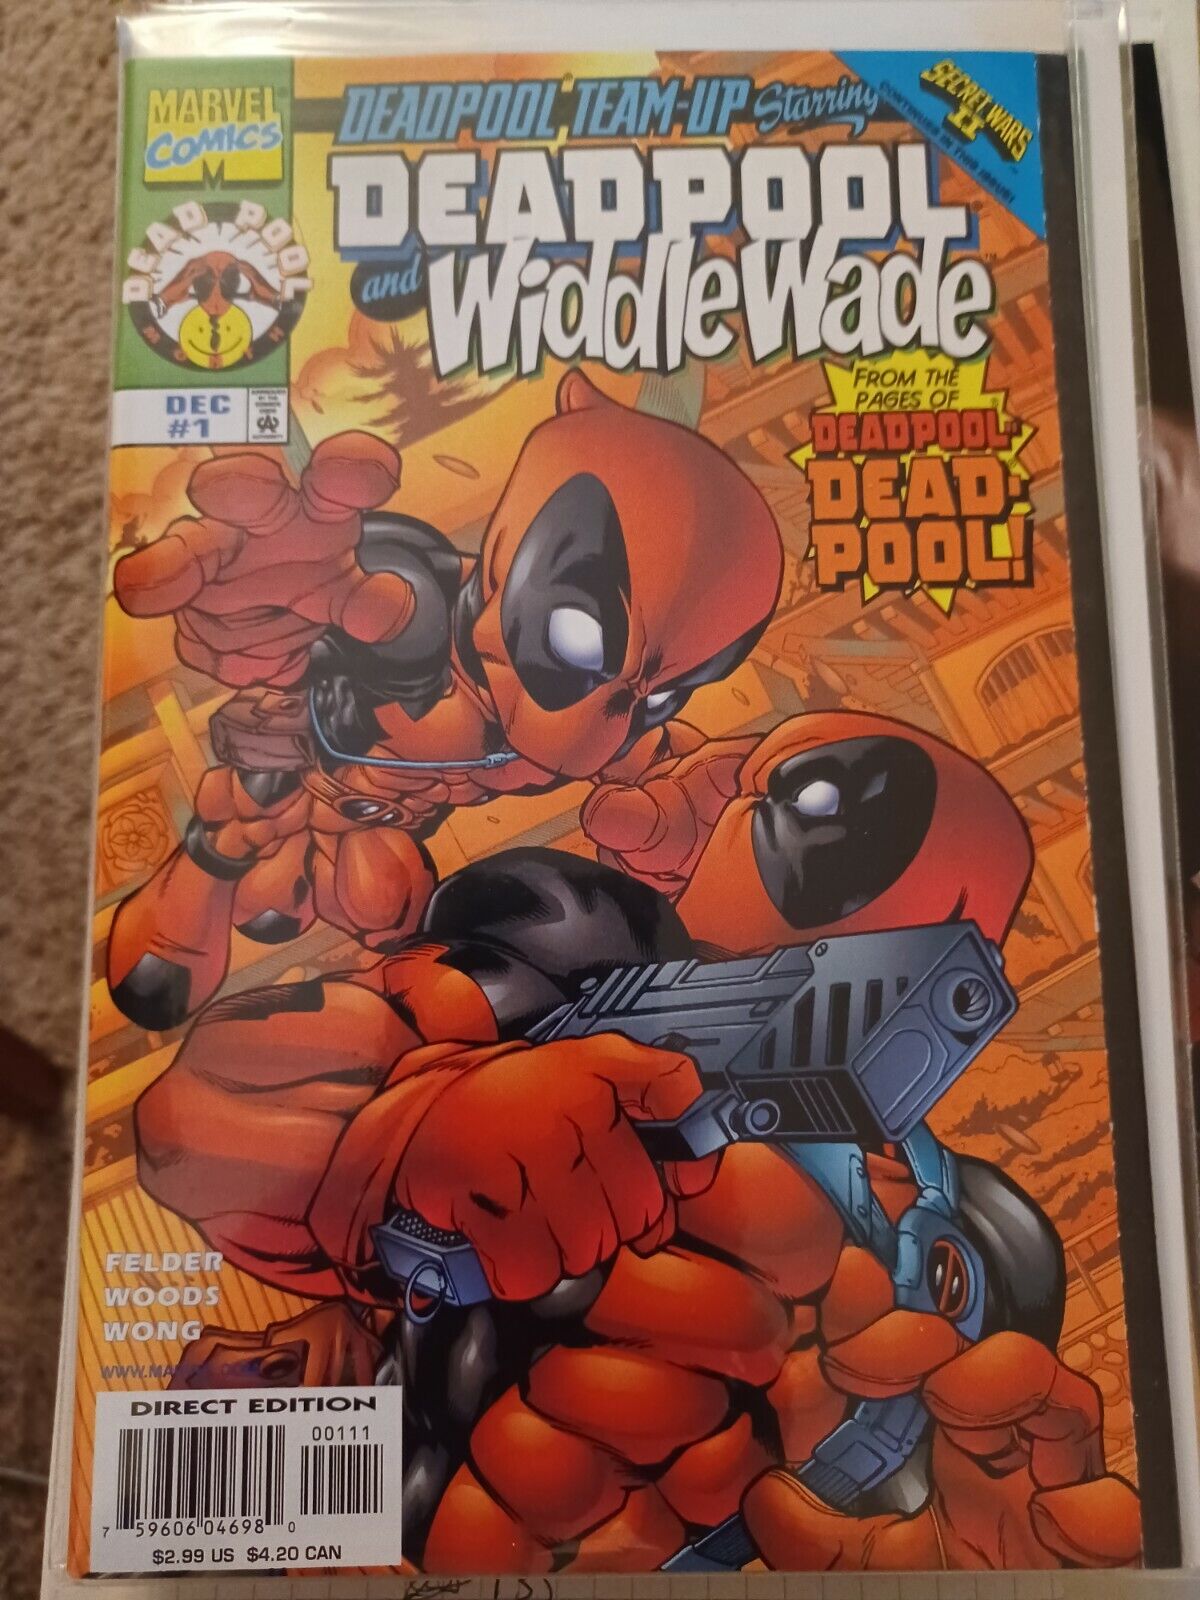 DEADPOOL and WIDDLE WADE #1 Team-Up 1st Appearance (1998) NM HTF Very Scarce